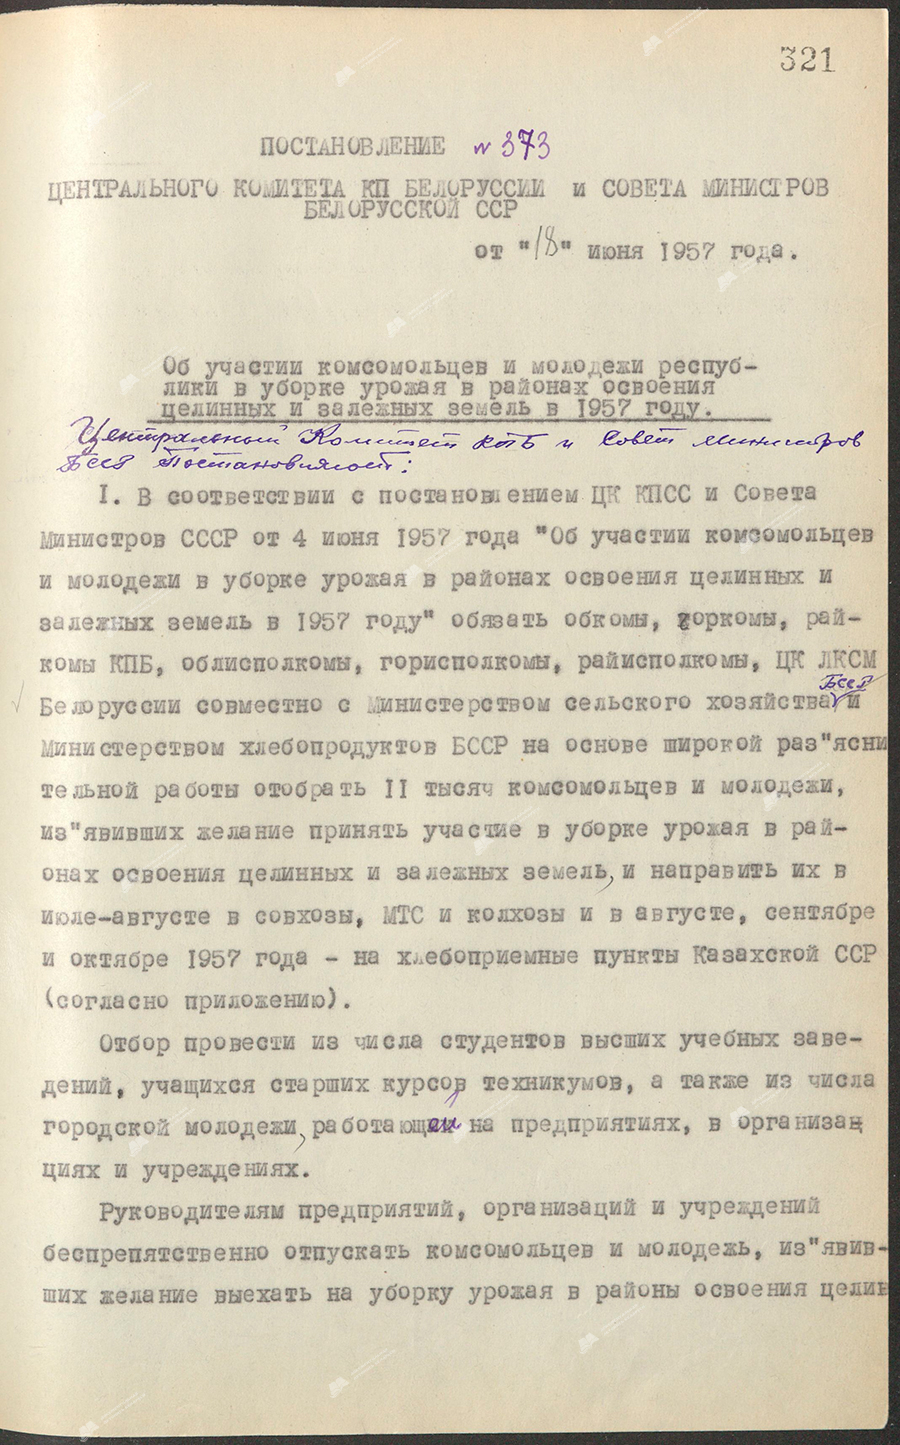 Resolution No. 373 of the Central Committee of the Communist Party of Belarus and the Council of Ministers of the Belarusian SSR «On the participation of Komsomol members and youth of the republic in harvesting in areas of development of virgin and fallow lands in 1957»-стр. 0